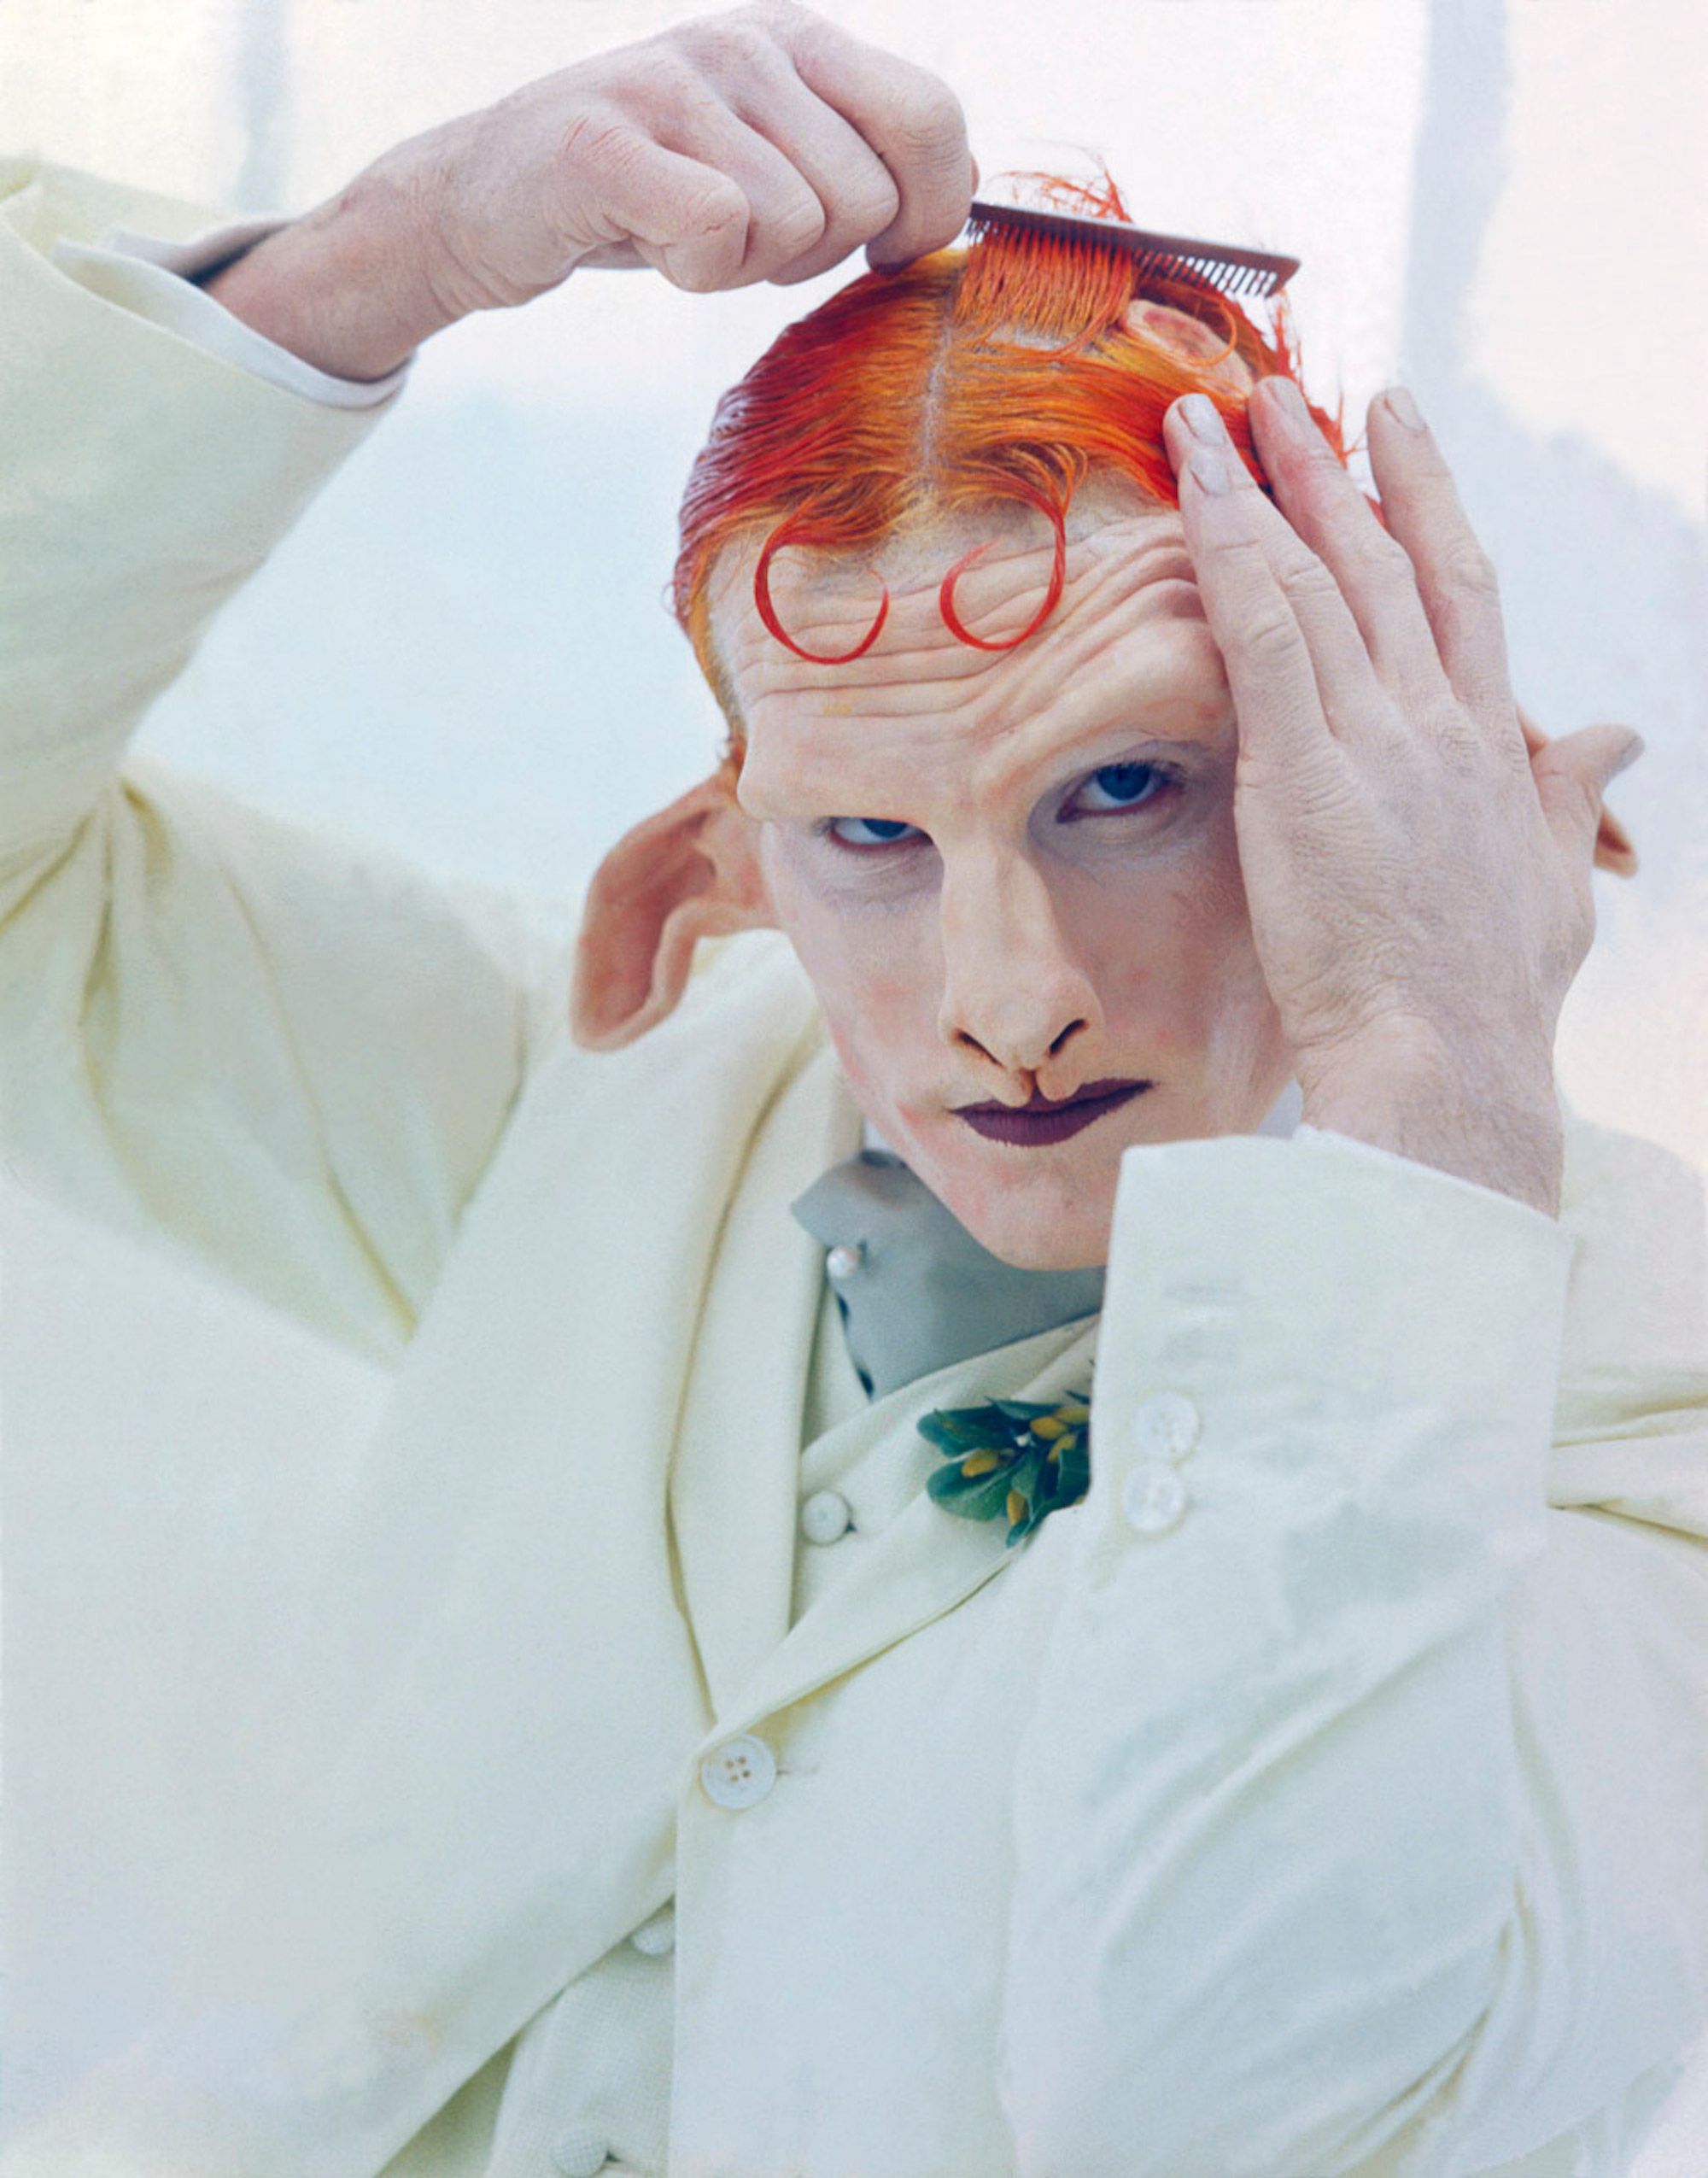 Matthew Barney's Cremaster Cycle returns to the big screen in New York